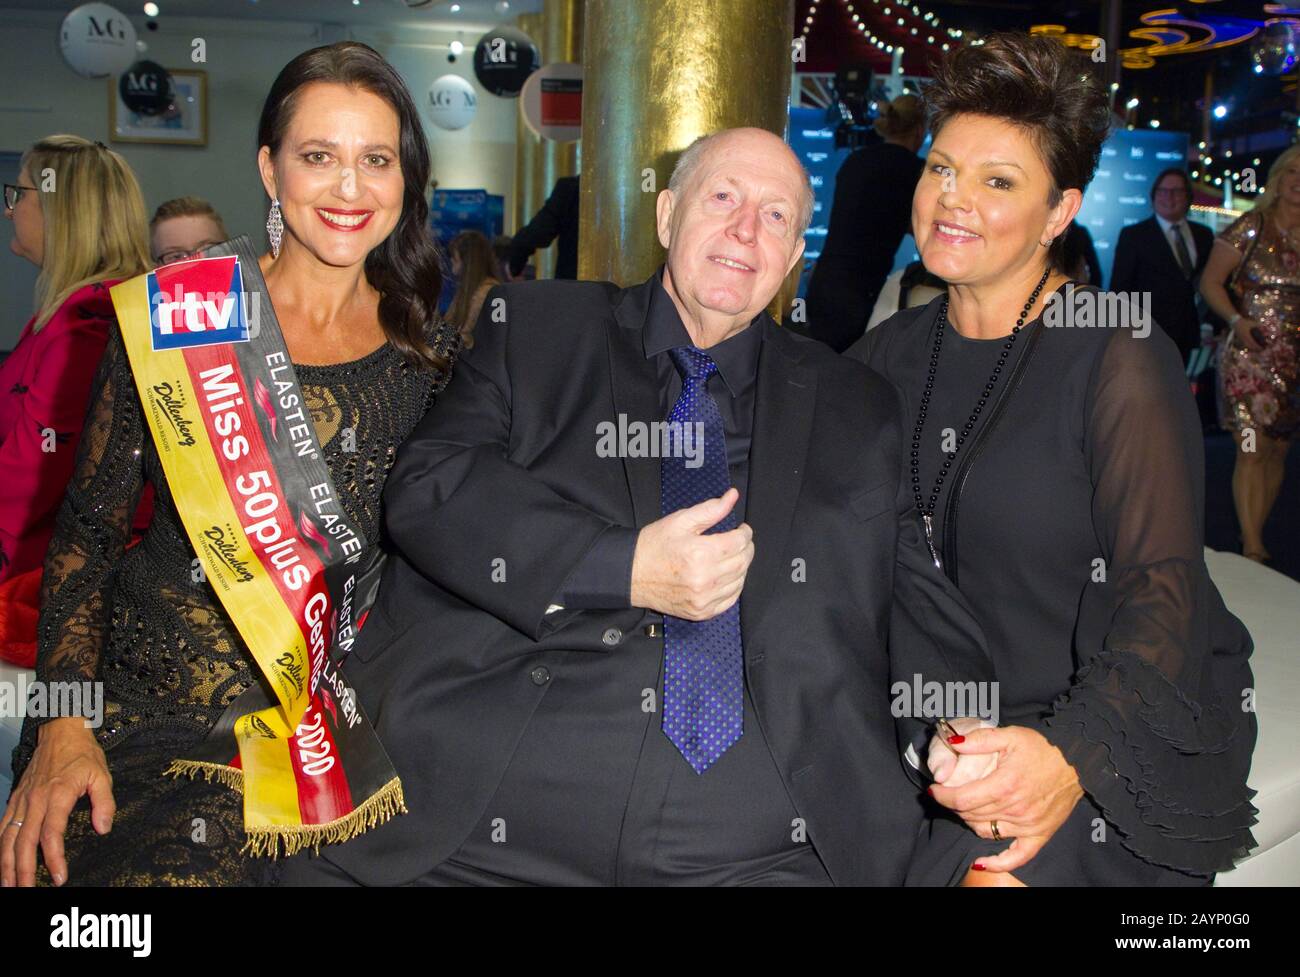 Rust, Germany. 15th Feb, 2020. Rust, Germany - February 15, 2020: Miss Germany Beauty Pageant Election at Europa-Park with Reiner Calmund, Miss Germany CEO Ines Klemmer and Miss 50plus | usage worldwide Credit: dpa/Alamy Live News Stock Photo